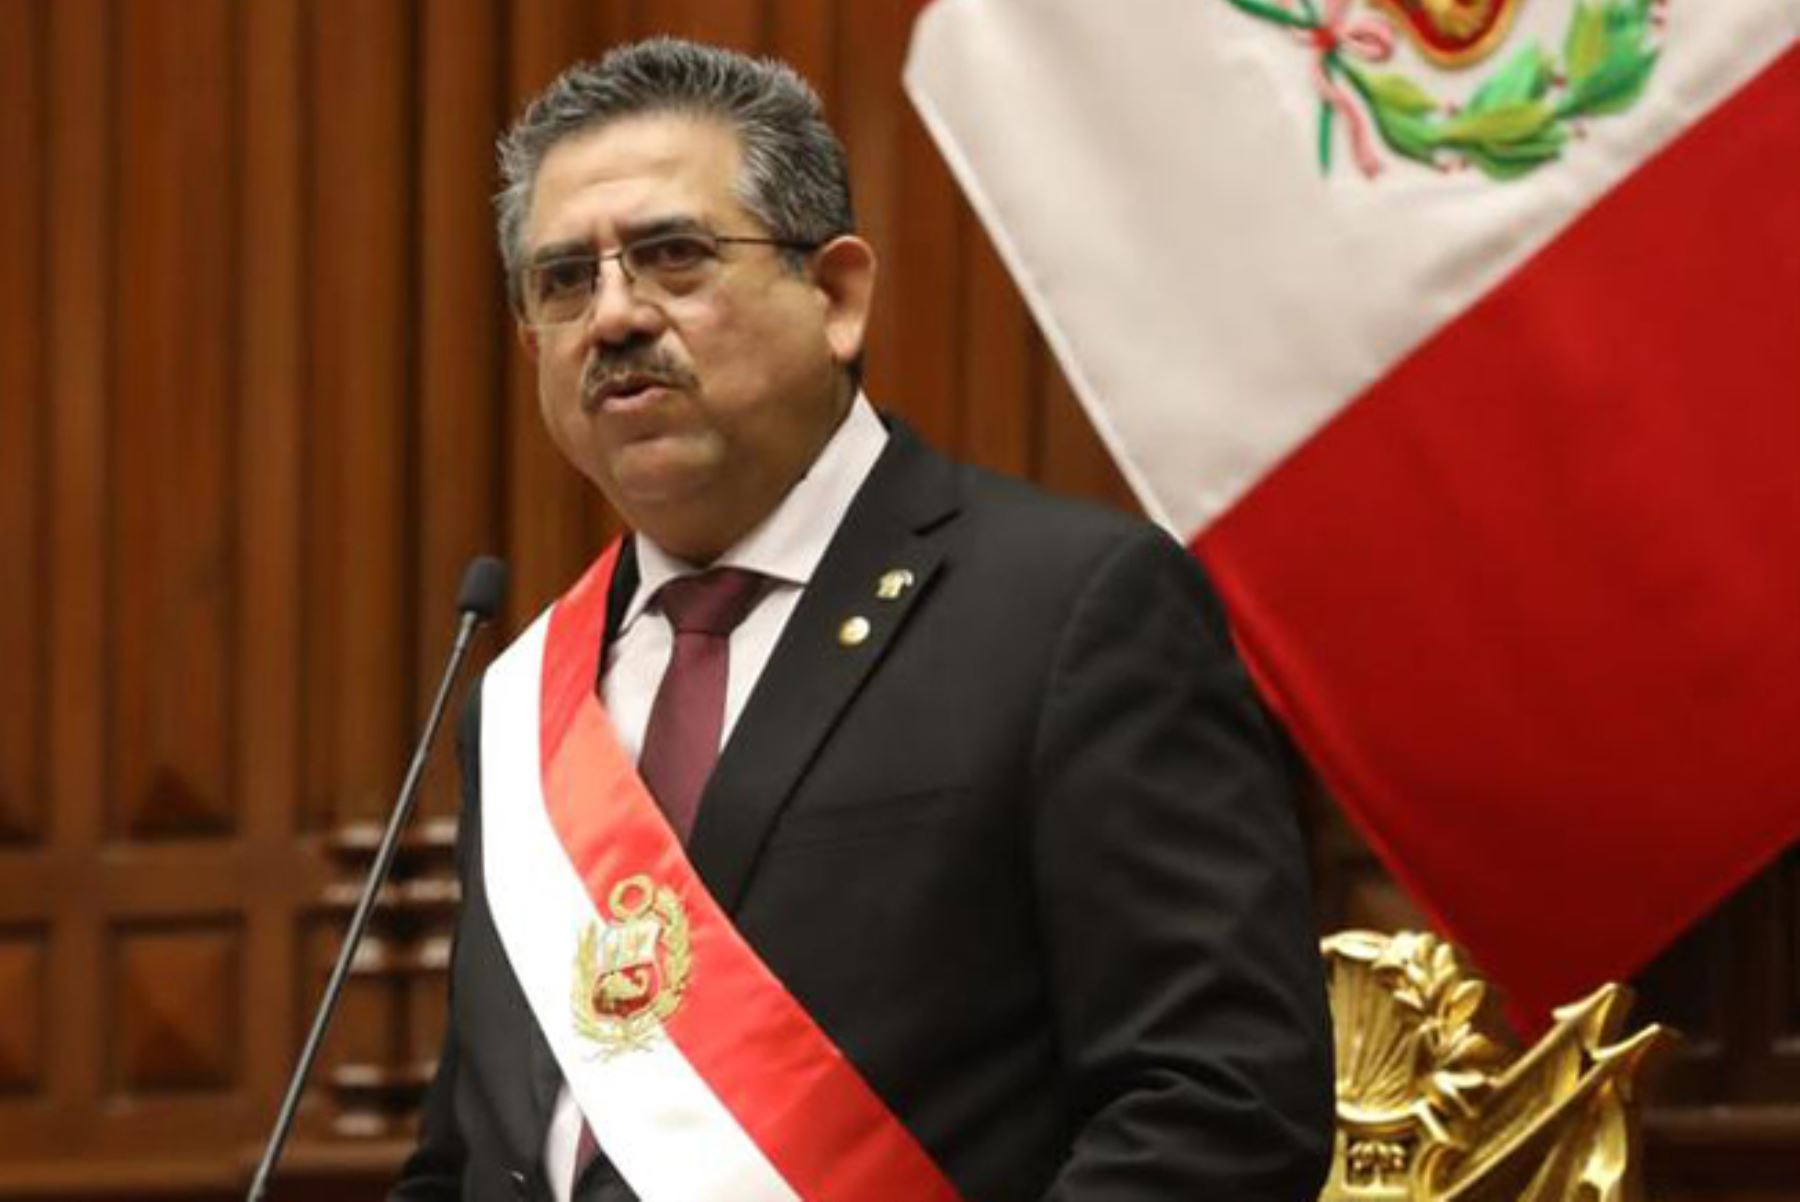 Congress Chairman Manuel Merino de Lama on Tuesday, November 10th, was sworn in as President of the Republic in a Parliament solemn session. He is scheduled to conclude the 2016-2021 presidential term on 28 July 2021.